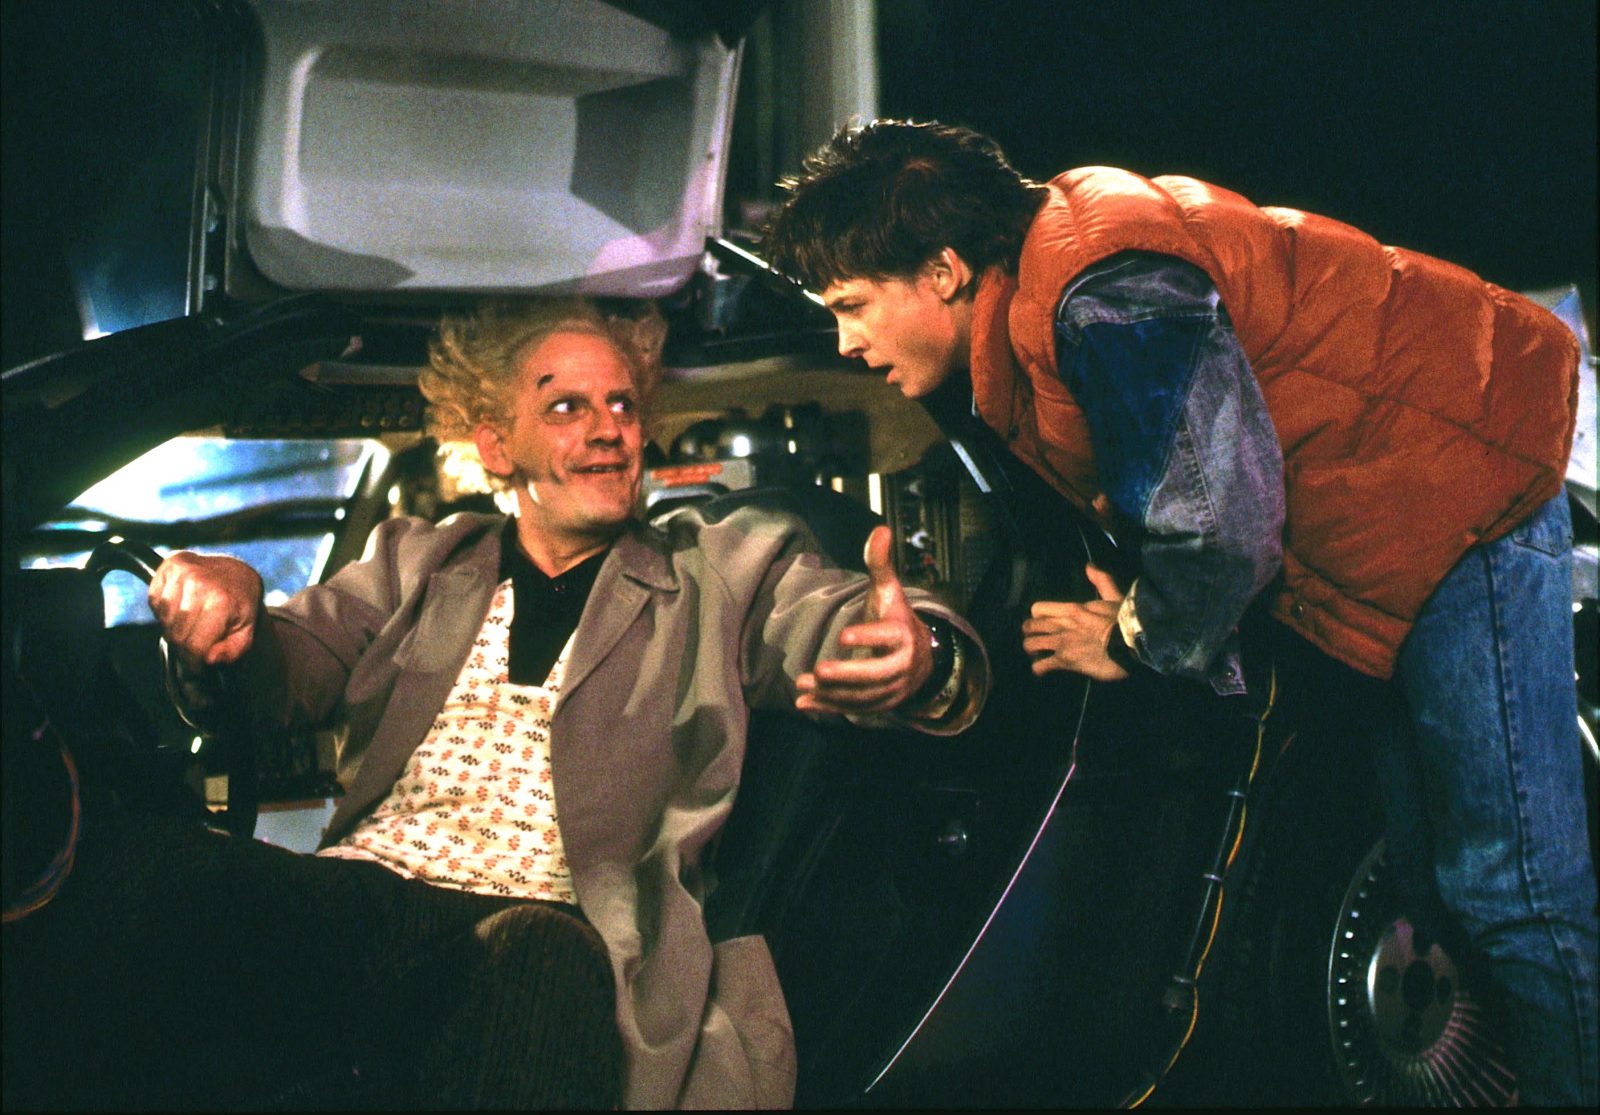 You Have 15 Questions to Prove You Have a Ton of General Knowledge Back To The Future